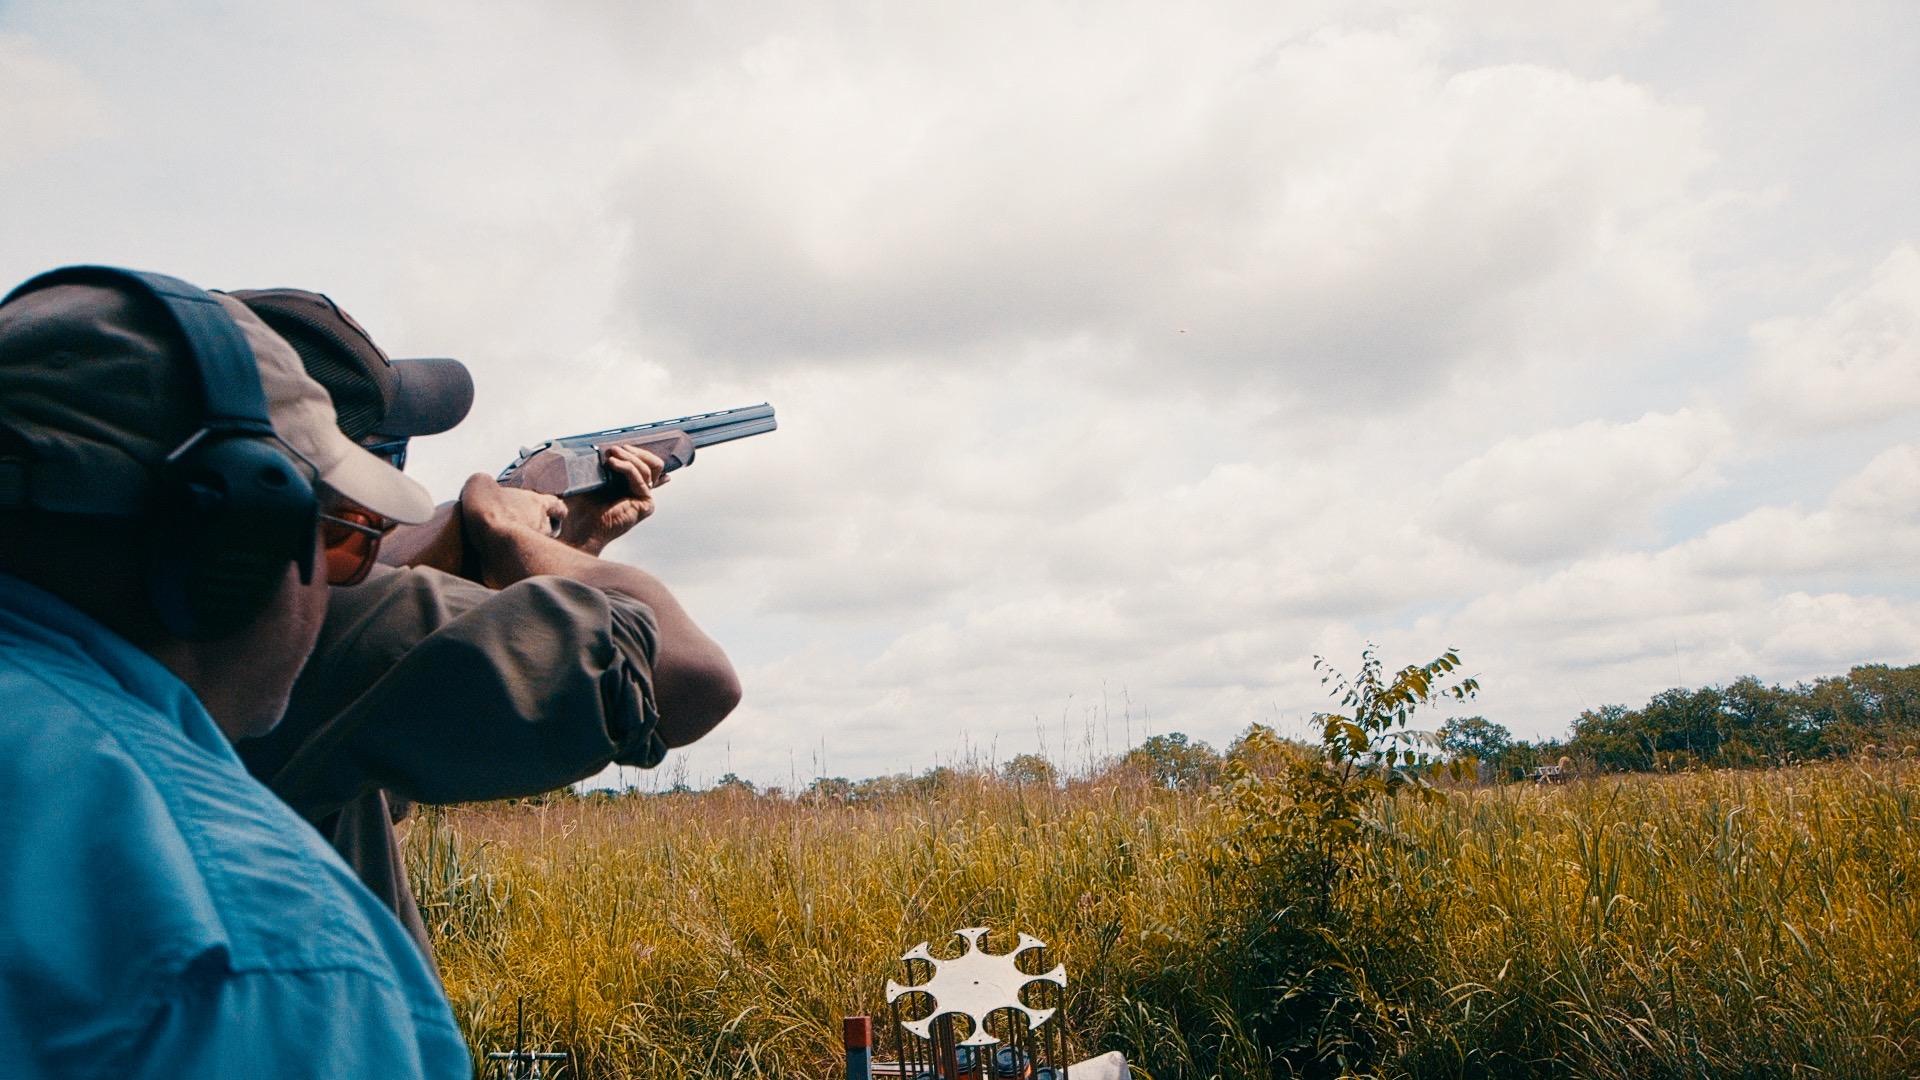 on the sporting clays course | Only Perfect Practice Makes Perfect